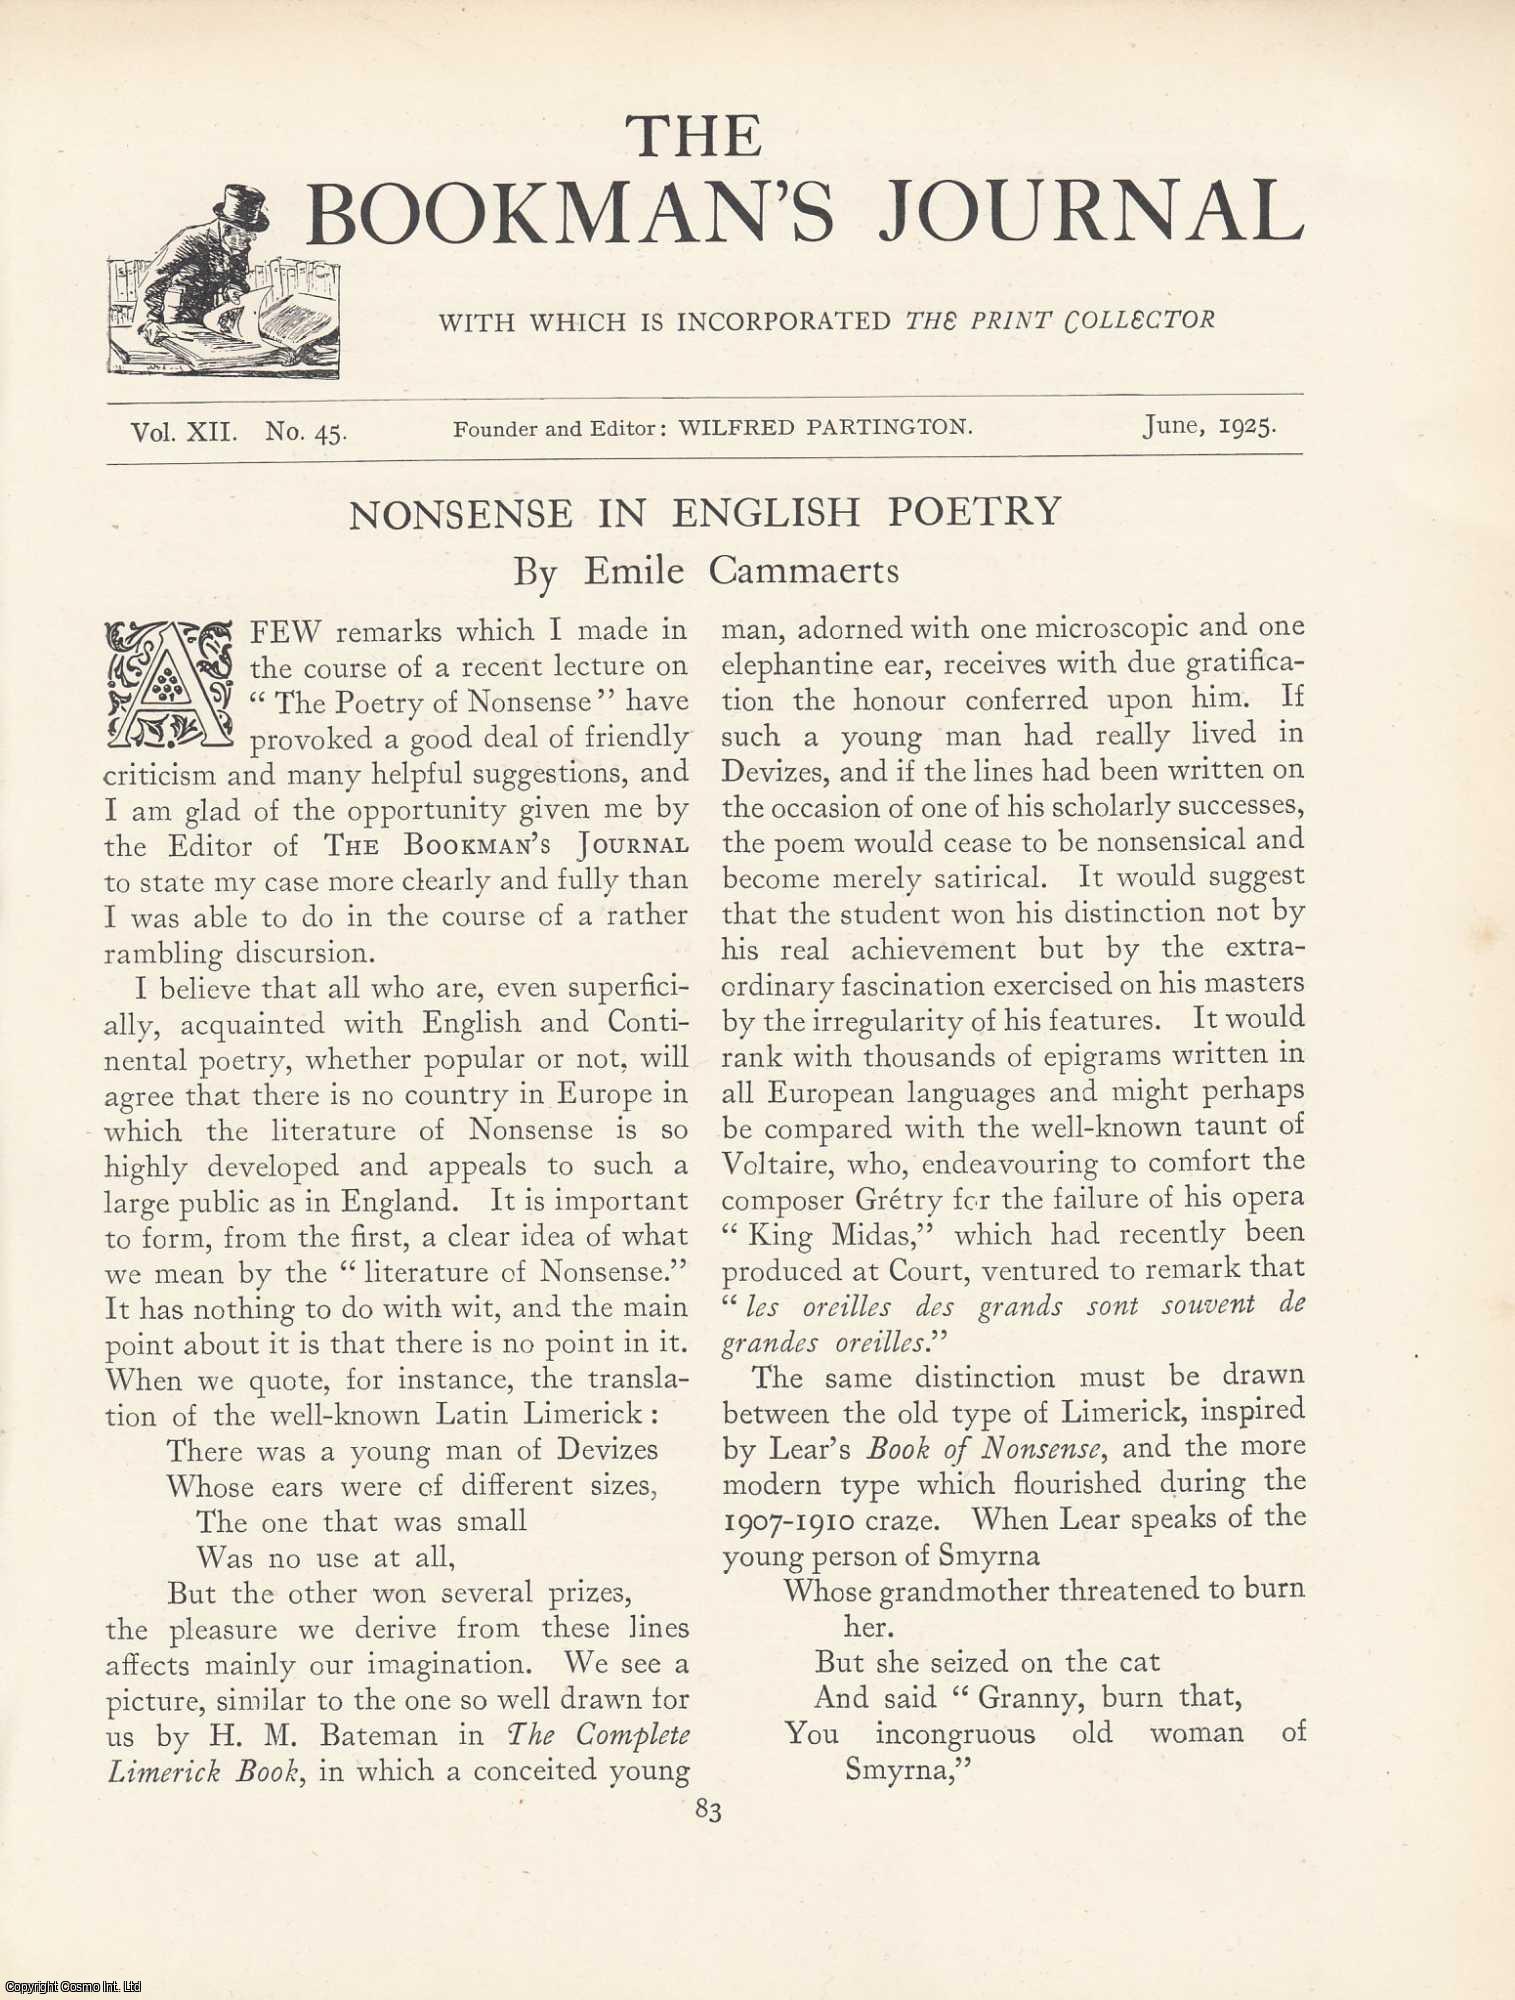 Emile Cammaerts - Nonsense in English Poetry. An original article from The Bookman's Journal.